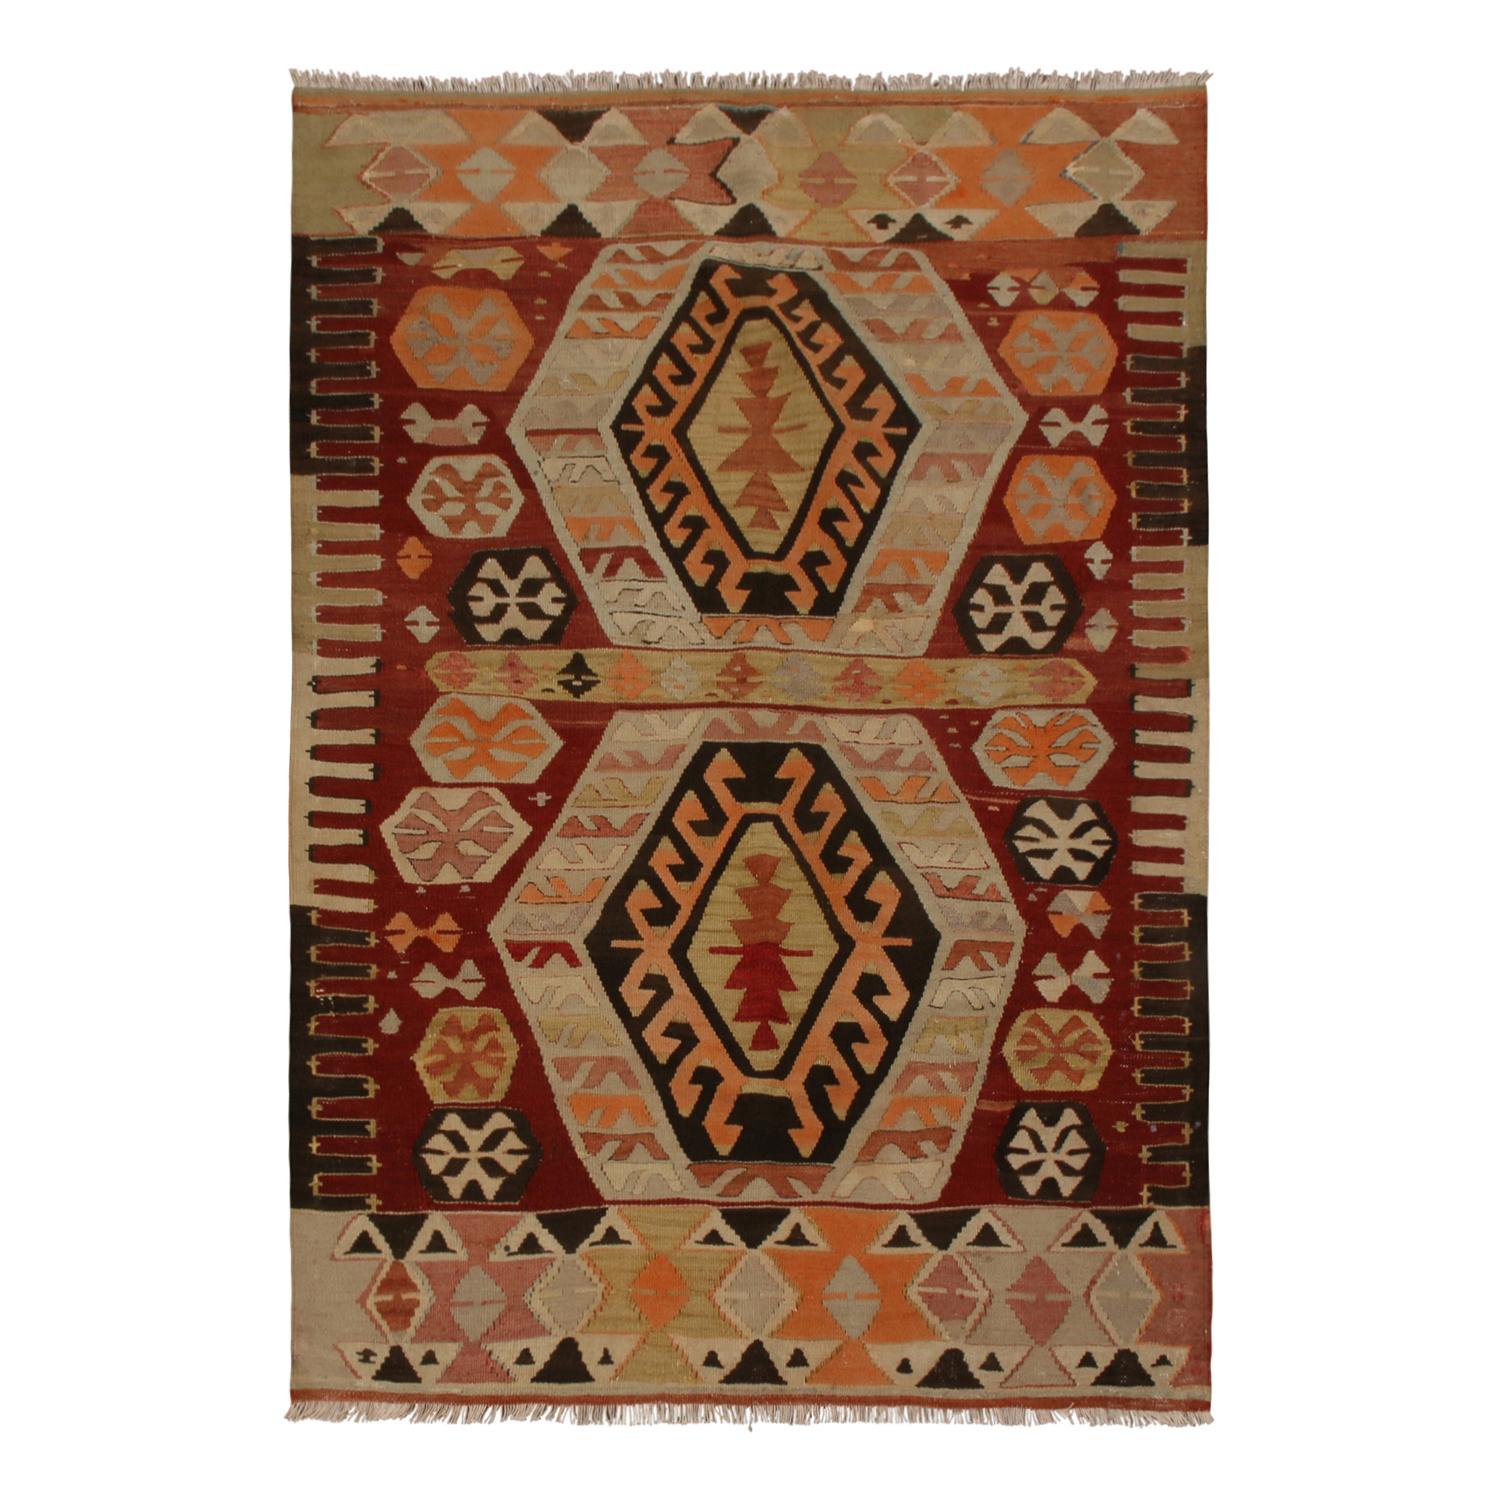 Flat-woven in high-quality wool originating from Turkey between 1940-1950, this vintage Gal Kilim rug hosts an intriguing pallet of vibrant rich and pastel colorways complementing a very Moroccan sense of joyful, tribal geometry, enjoying the finest